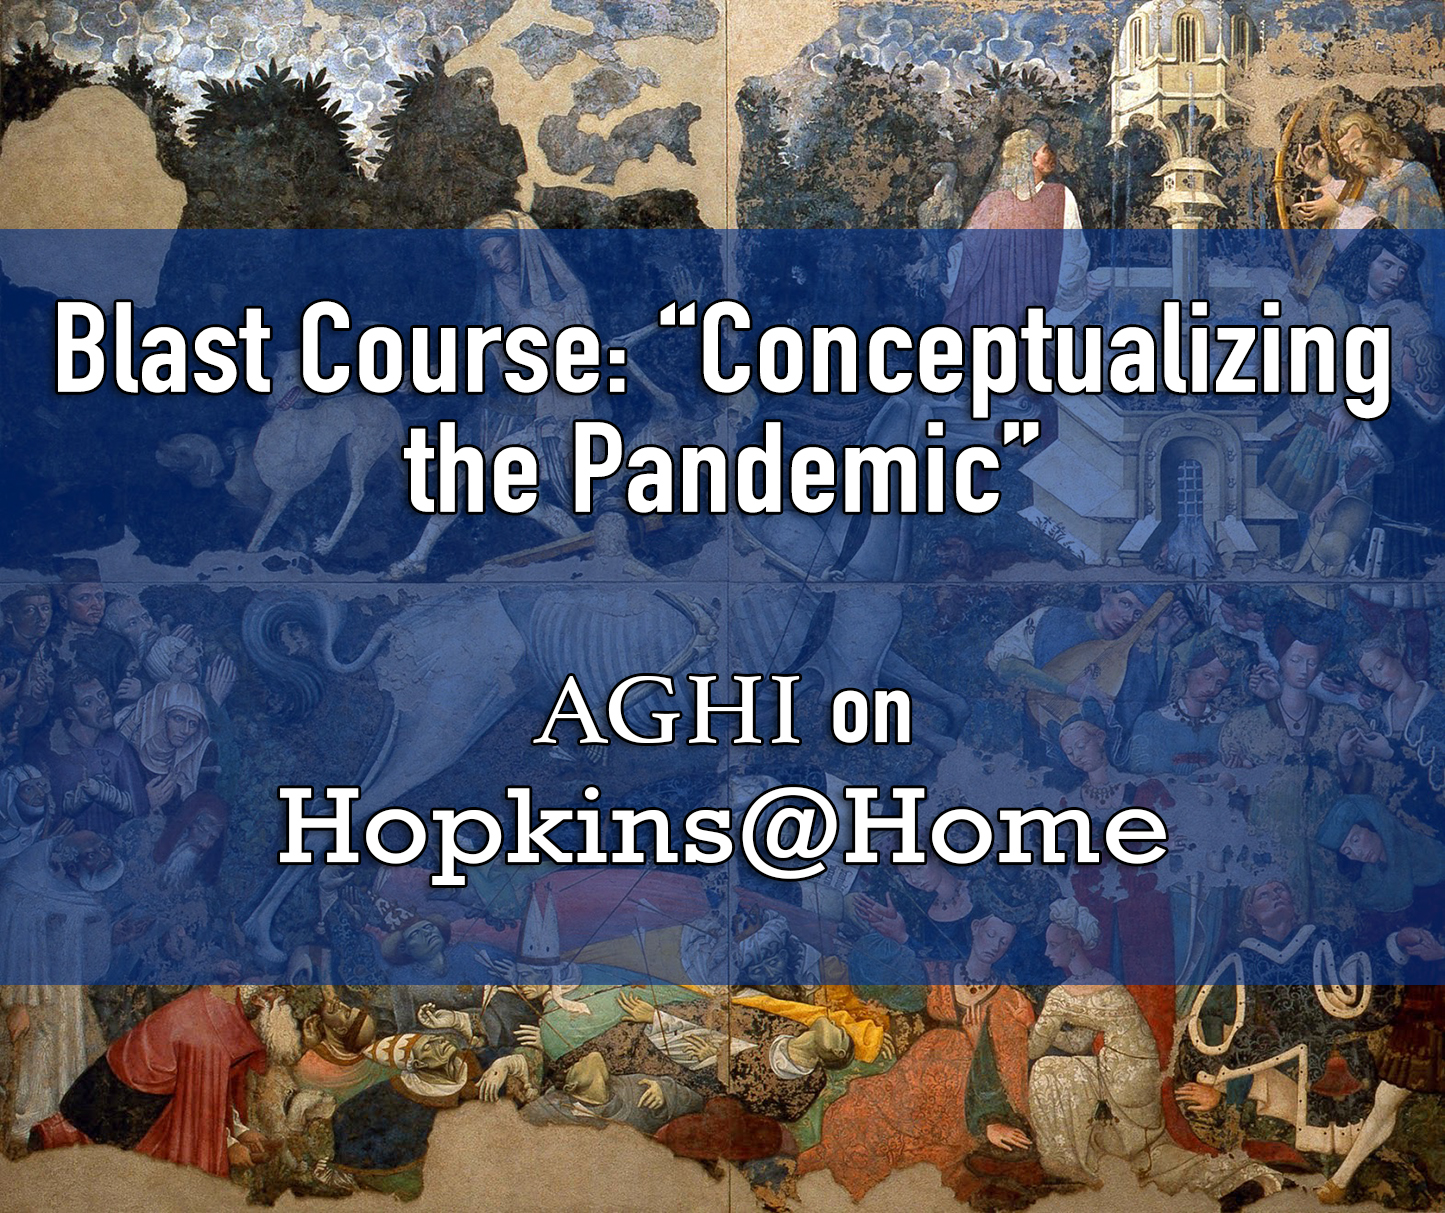 Blast Course: "Conceptualizing the Pandemic: Emergency Humanities during COVID-19"